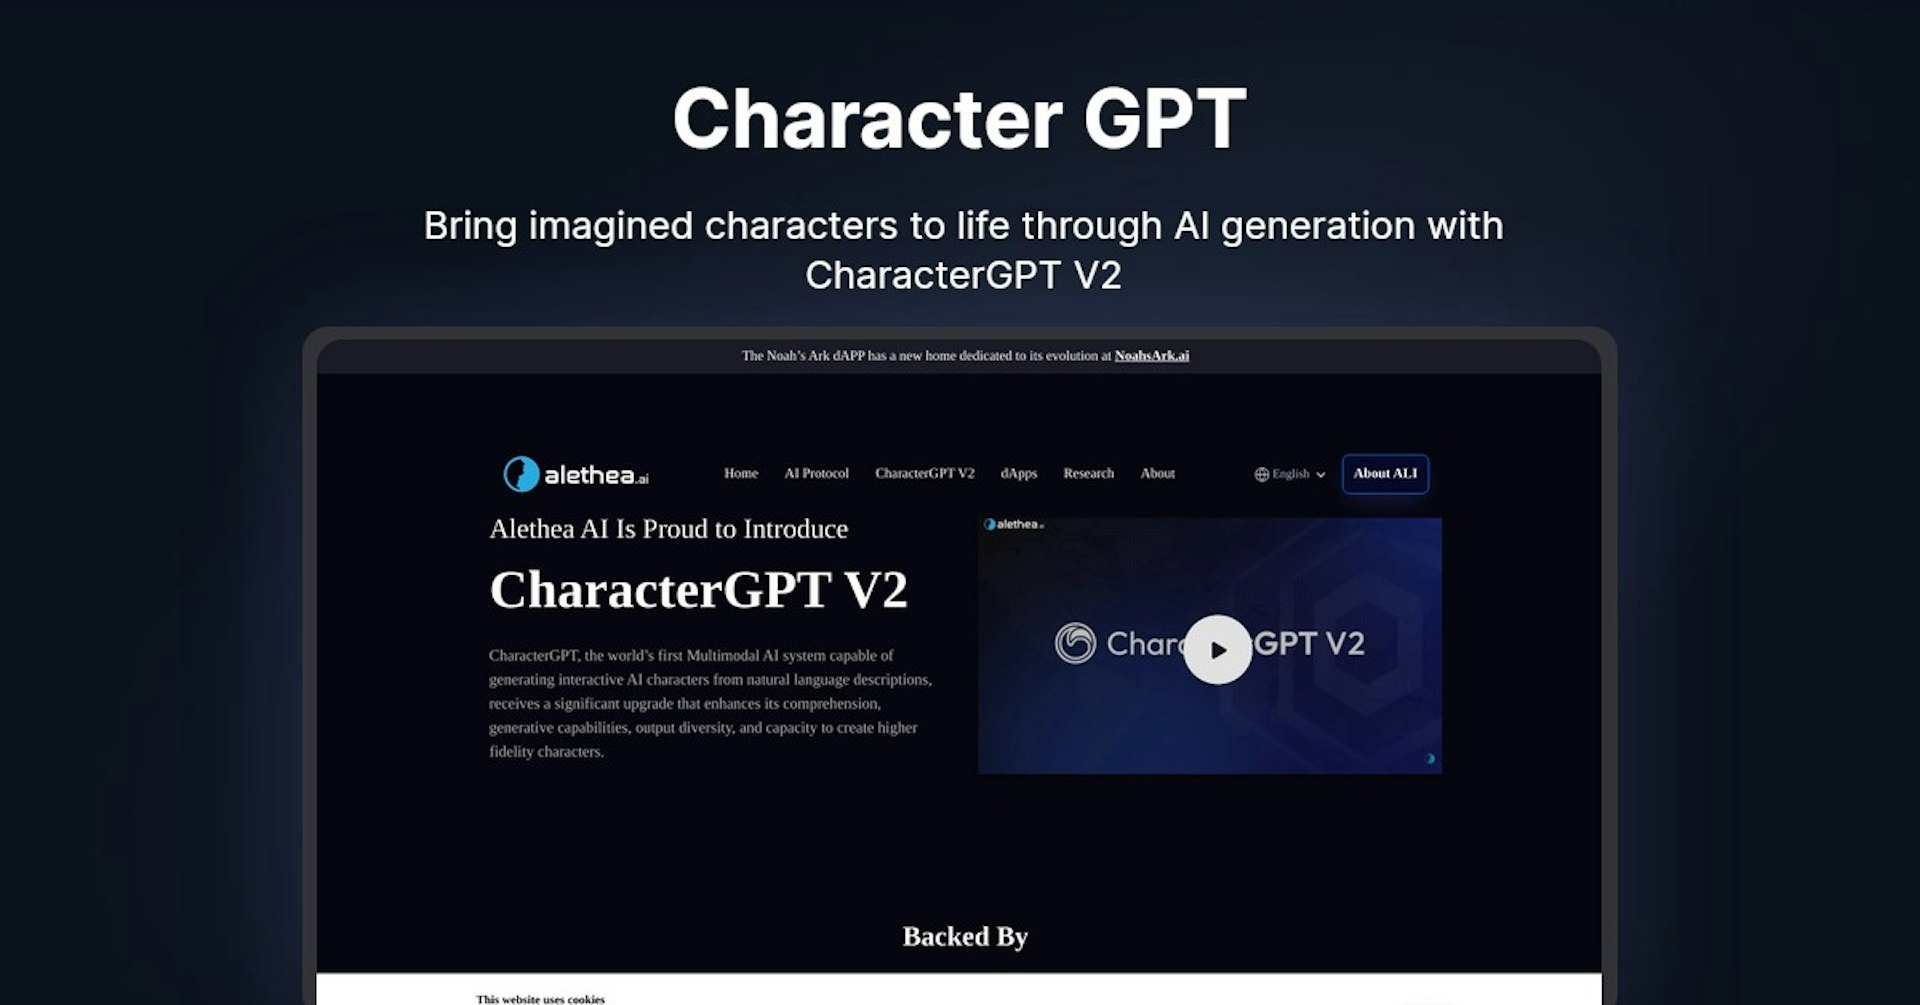 Character GPT